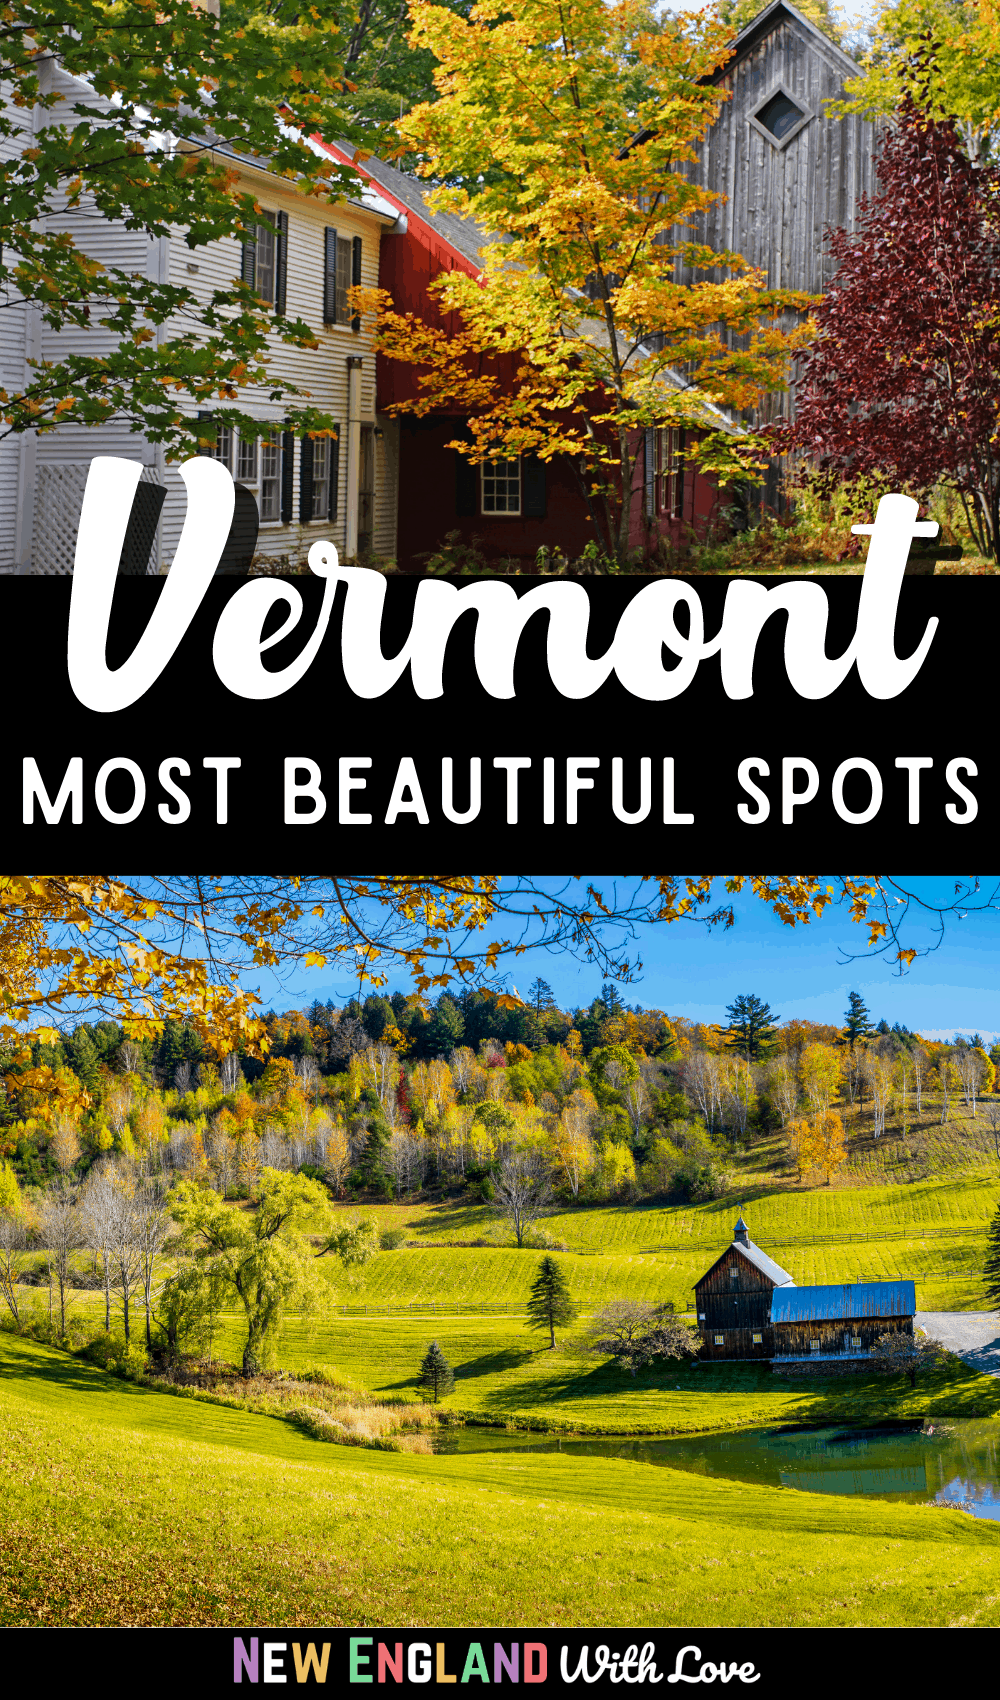 Graphic reading "Vermont Most Beautiful Spots"